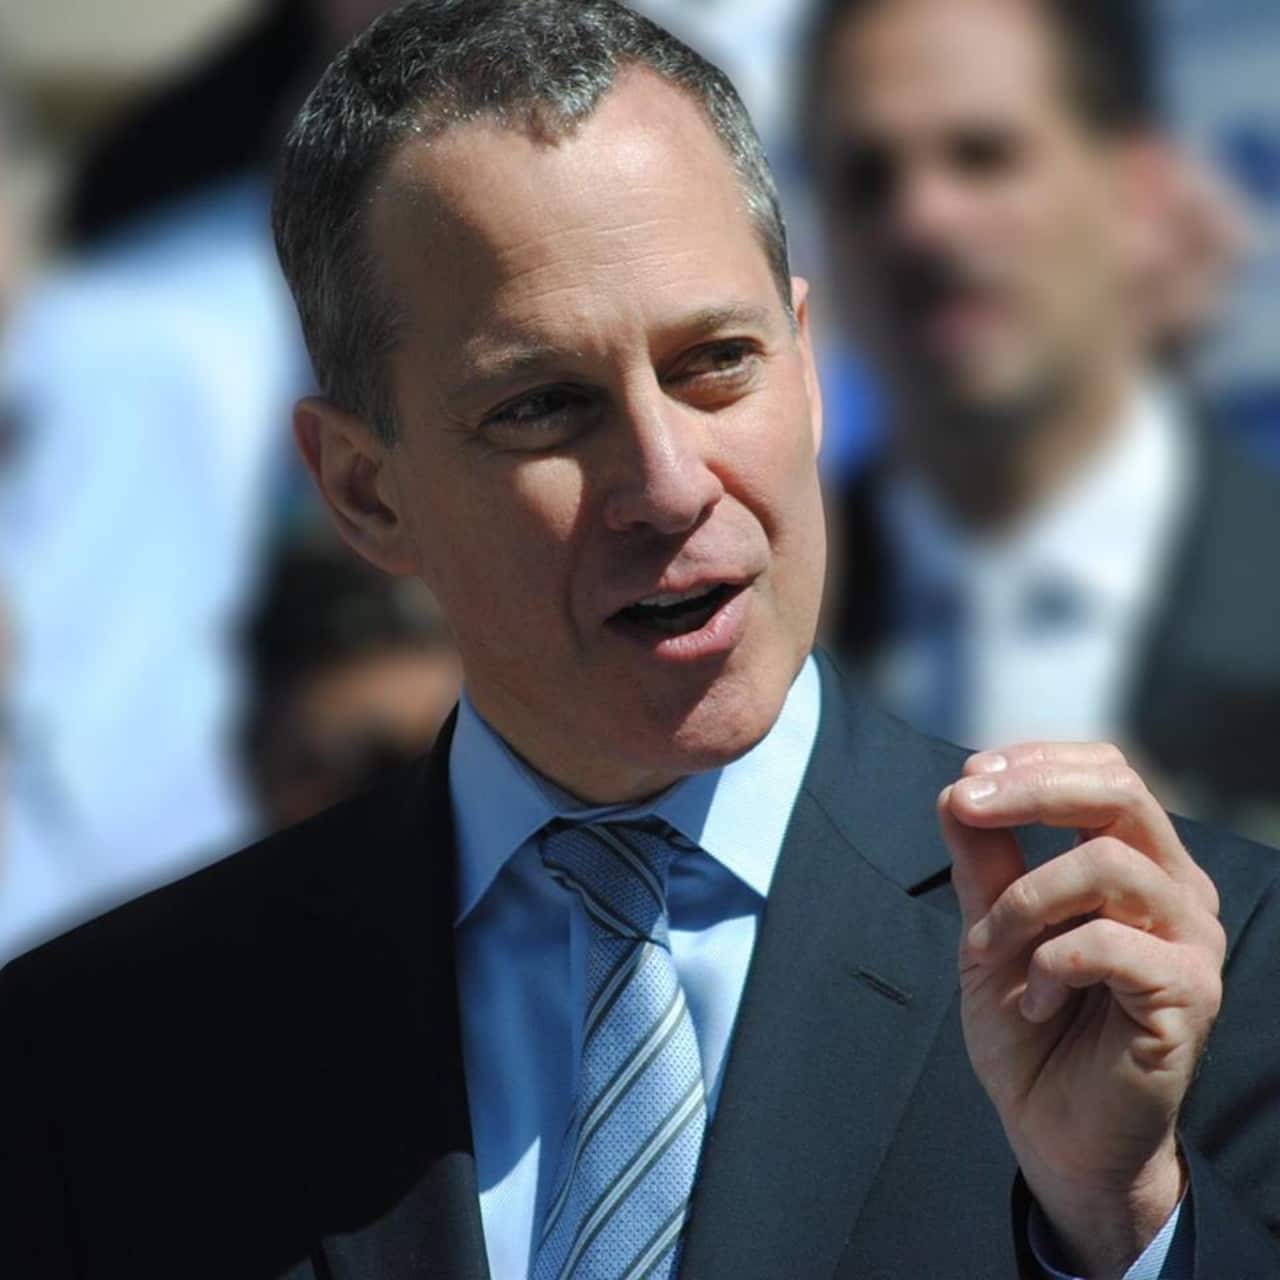 New York Attorney General Eric Schneiderman announced the sentencing Tuesday of a New Rochelle restaurant owner for underpaying employees.